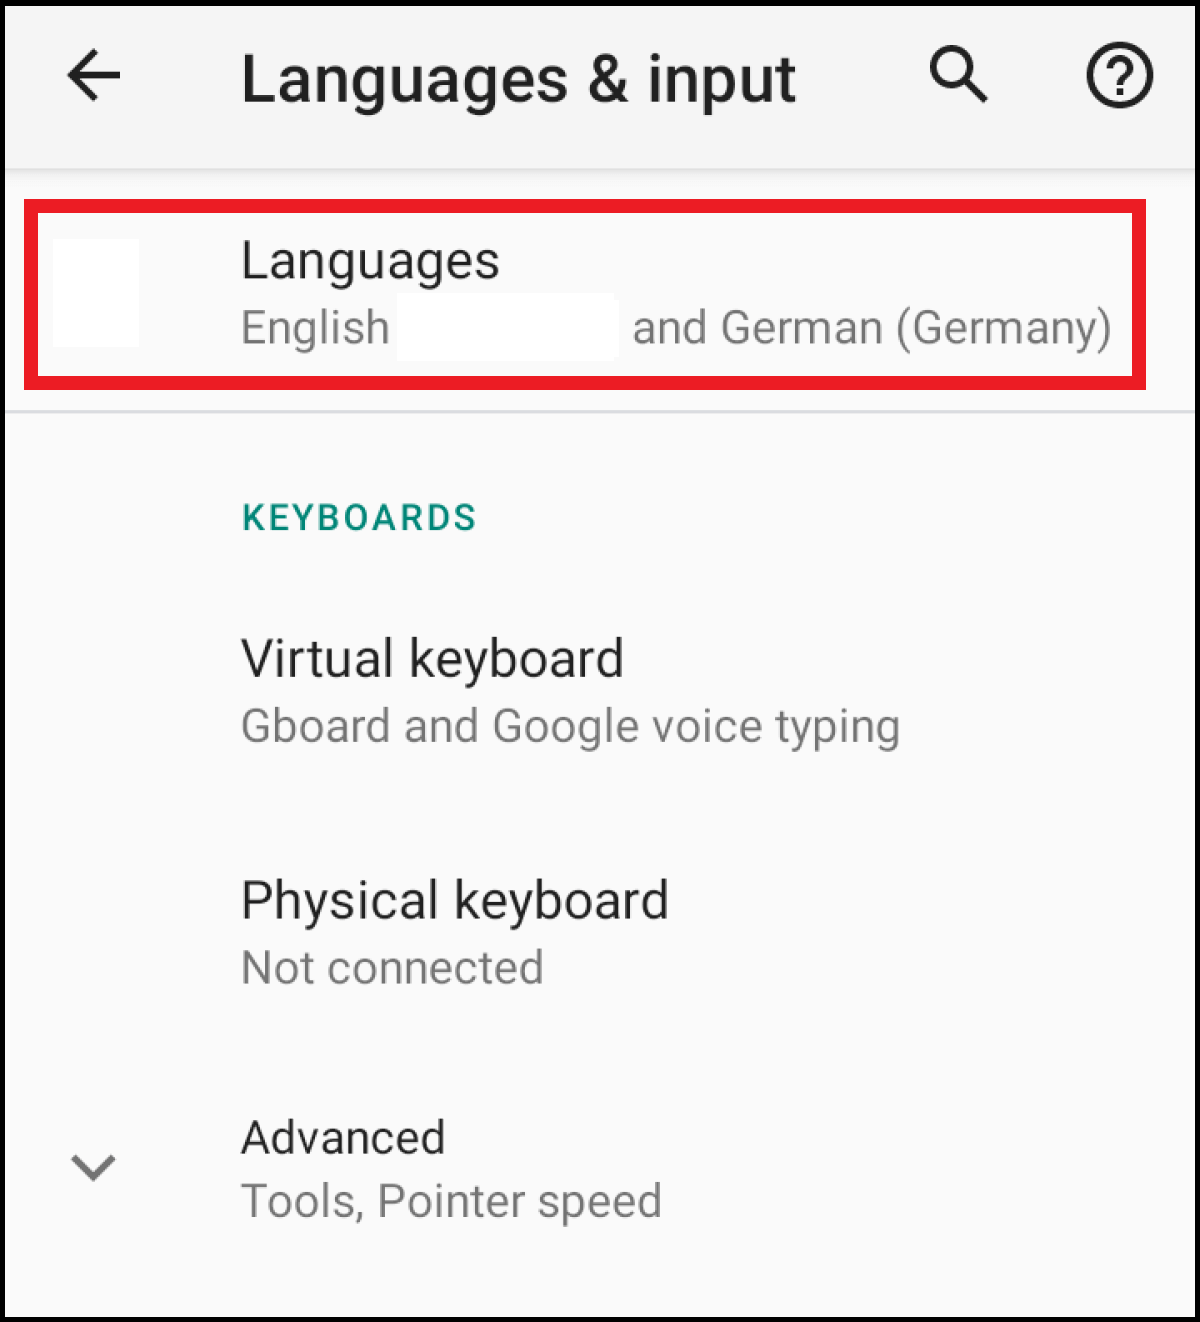 Language options available under the “Languages & input” tab